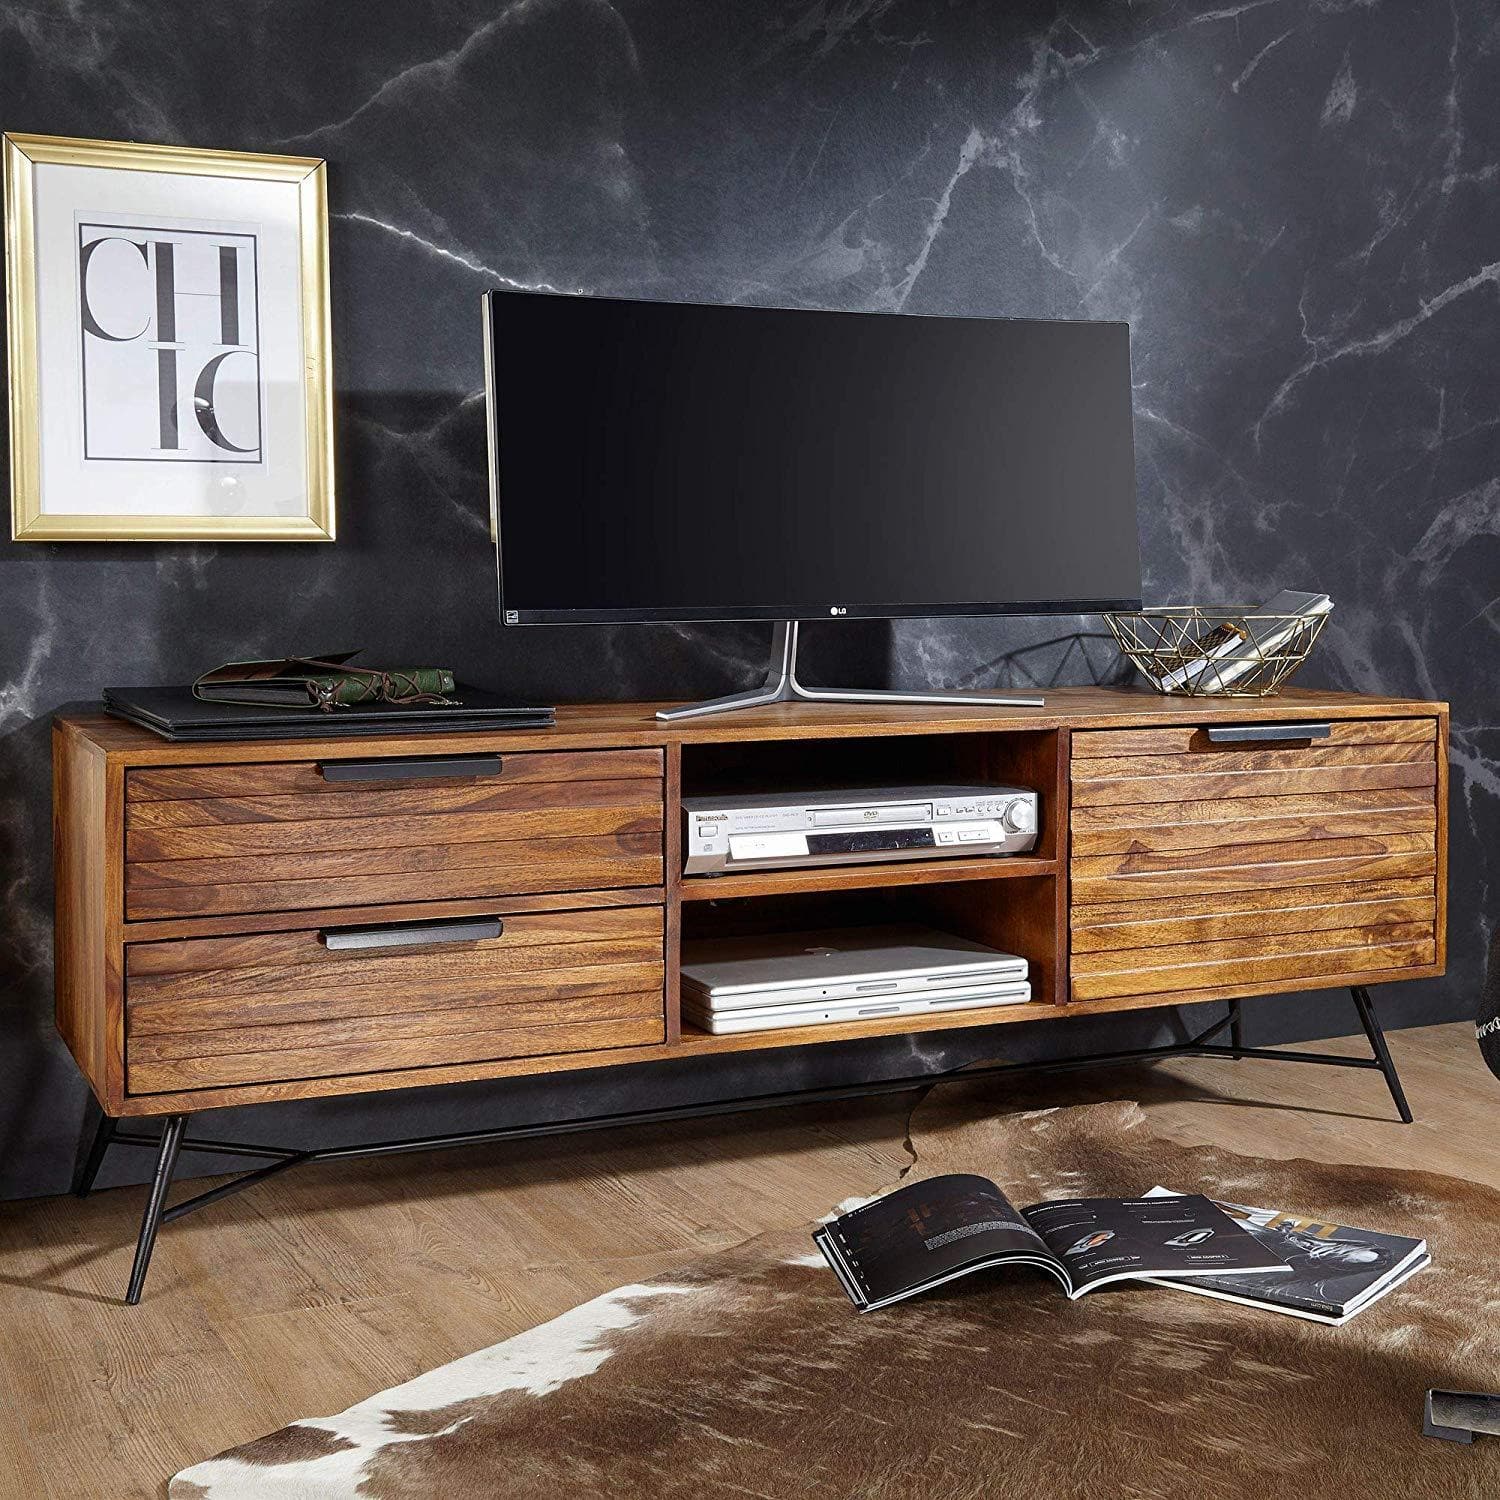 Nancy's TV Cabinet - Solid Wooden TV Cabinet - Lowbord Sheesham - Coffee Table - 160 x 54 x 40 cm